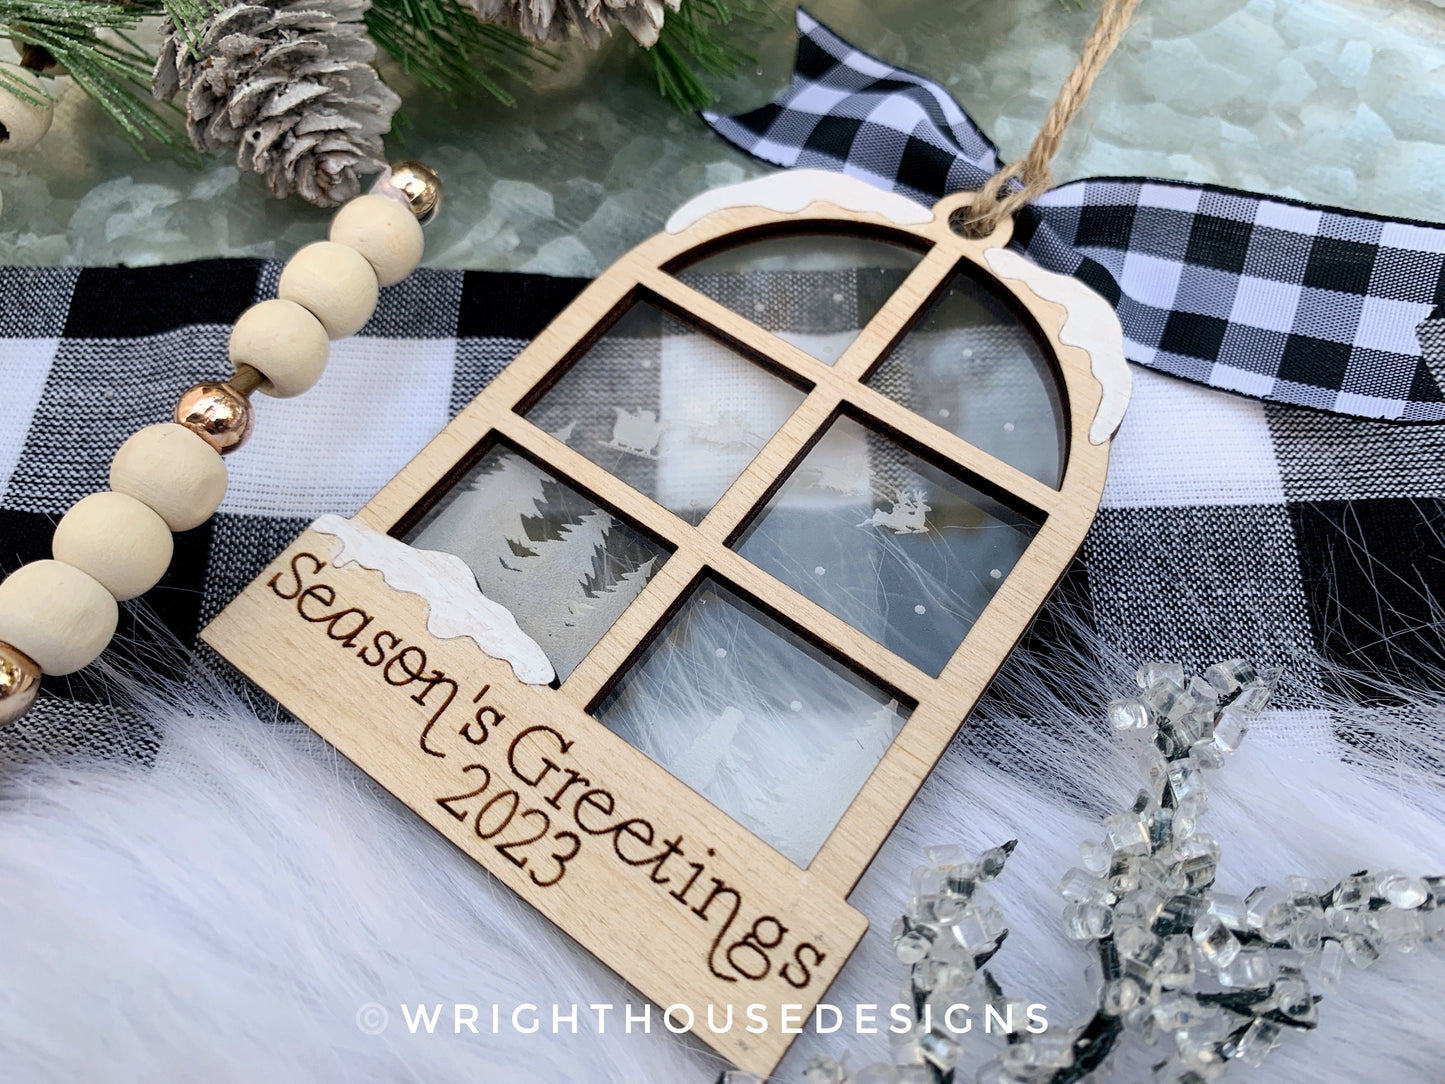 Santa Sleigh Woodland Snowman Scene Ornament - Engraved Personalized Christmas Eve Tree Ornament - Layered Wood and Acrylic Window Ornament